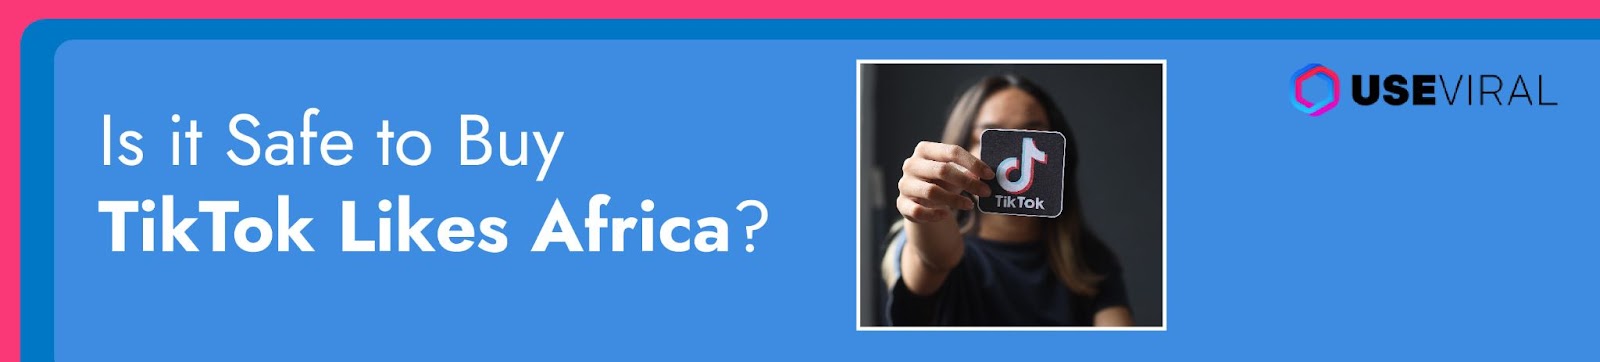 Is it Safe to Buy TikTok Likes Africa?